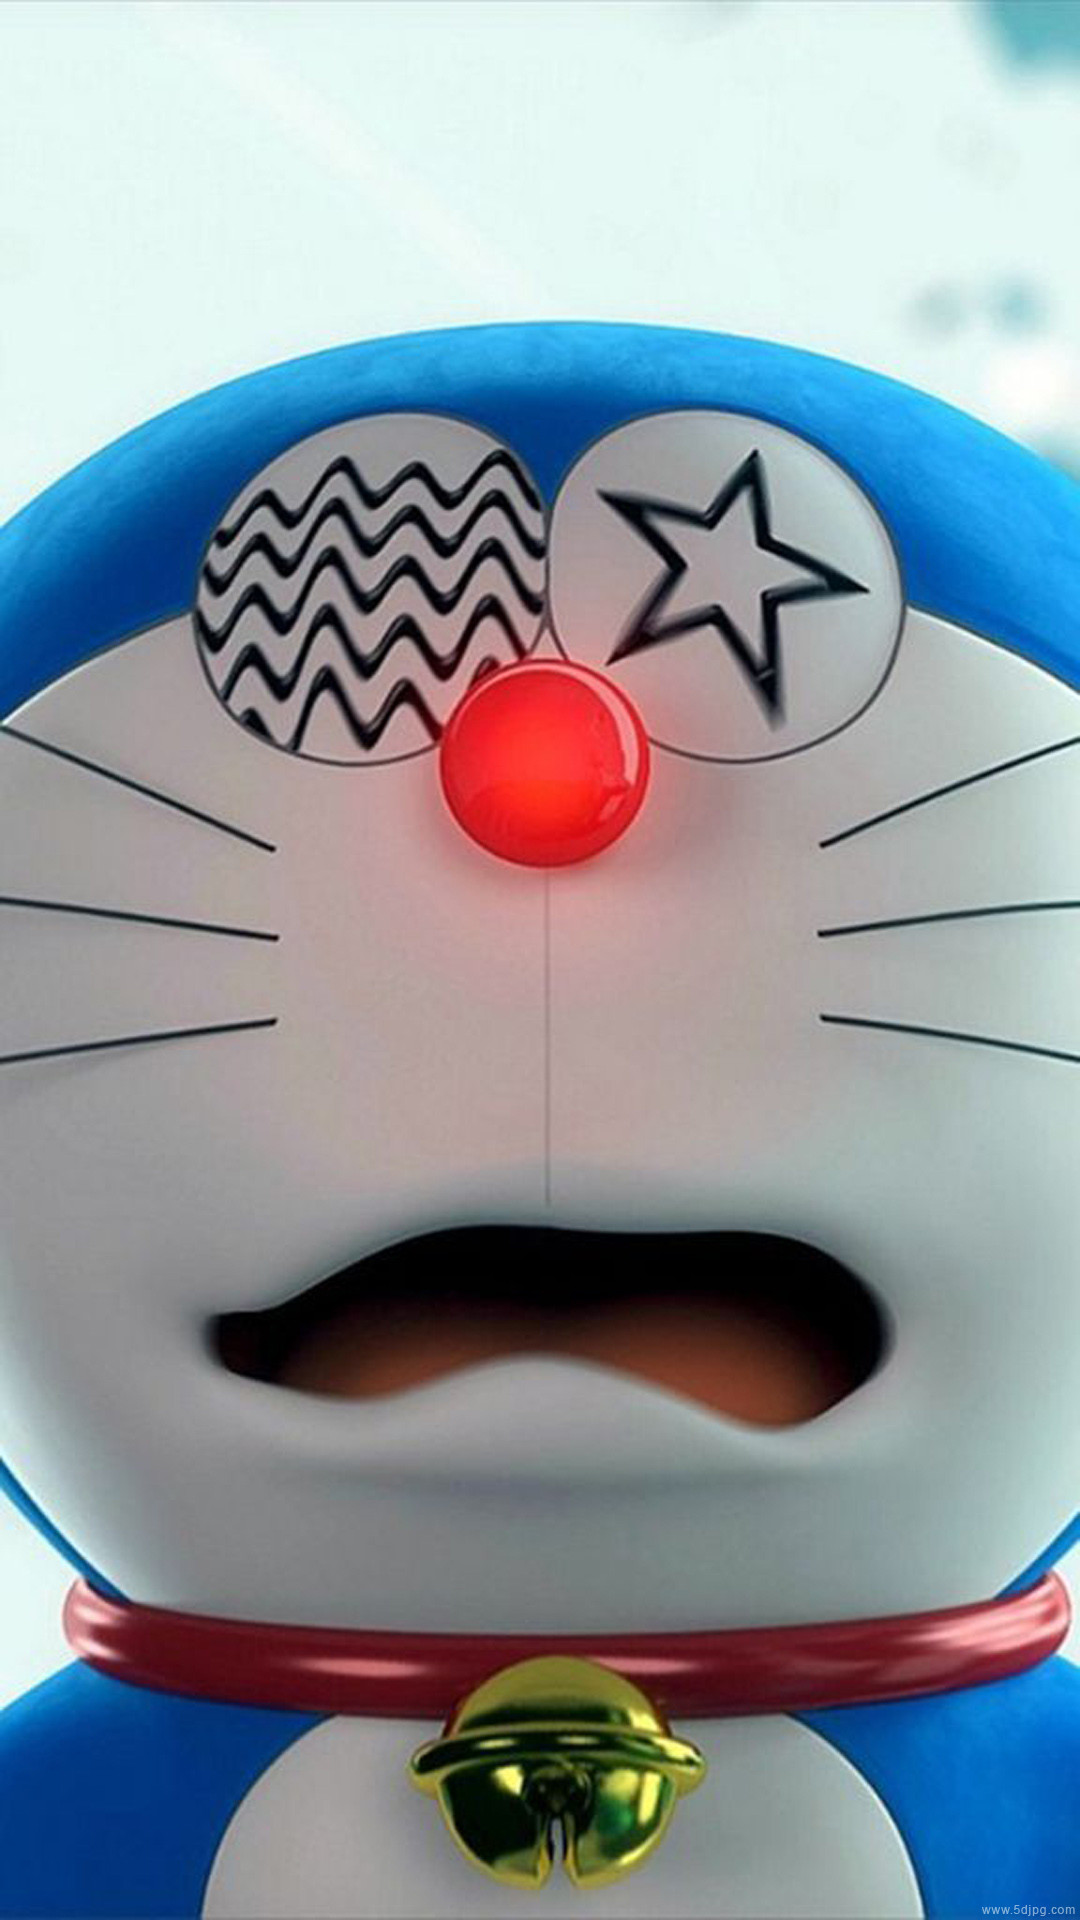 Download The Android Wallpaper 
 Data-src /w/full/0/c/0/232848 - Doraemon Hd Wallpaper Android - HD Wallpaper 